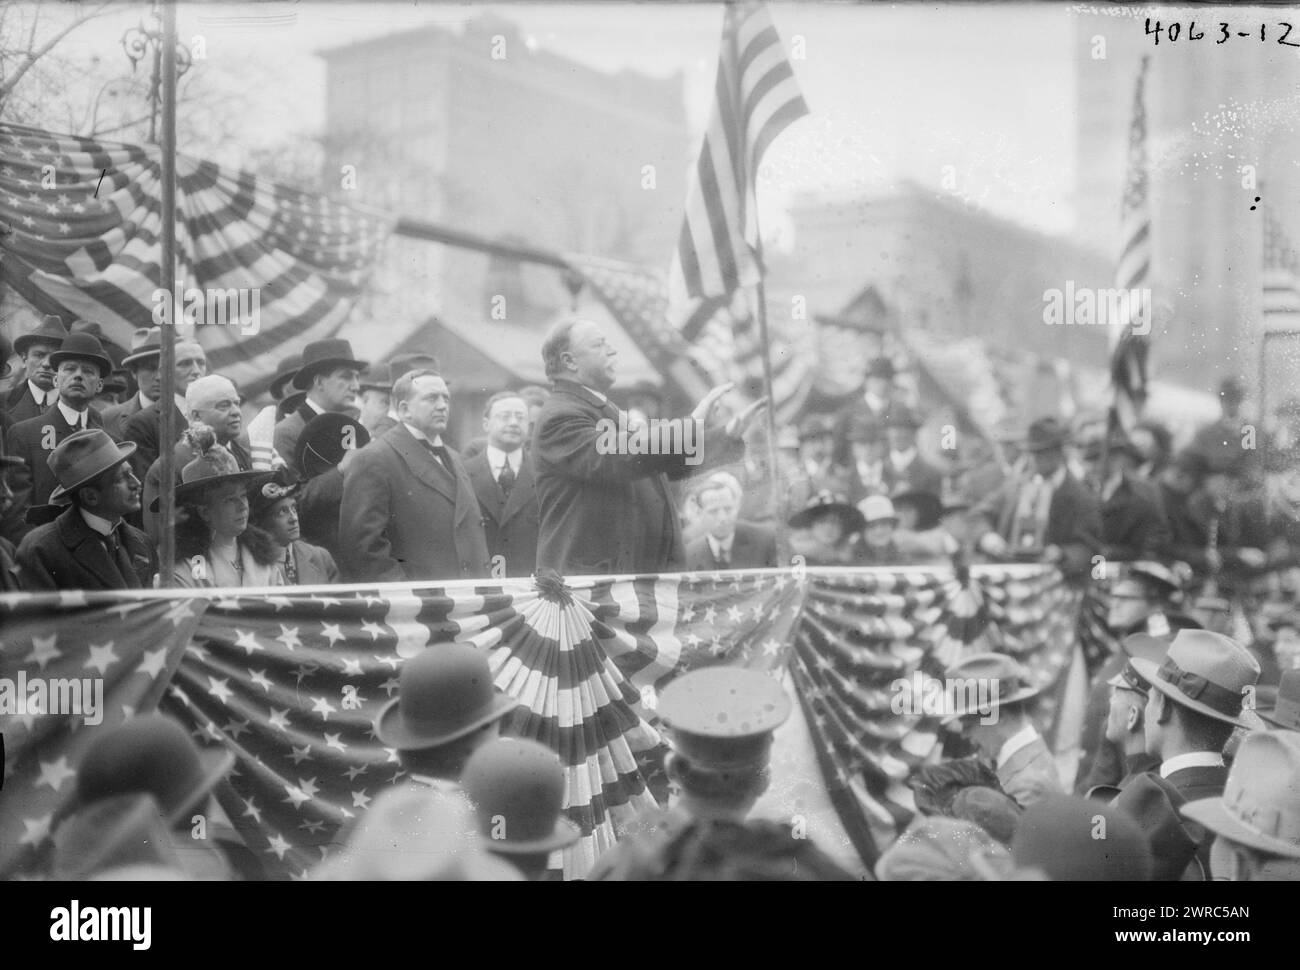 unidentified speaker (W.H. Taft), Photograph shows former president William Howard Taft campaigning for Republican candidate Charles Evans Hughes on Nov. 4, 1916 in Union Square, New York City., 1916 Nov. 4, Glass negatives, 1 negative: glass Stock Photo